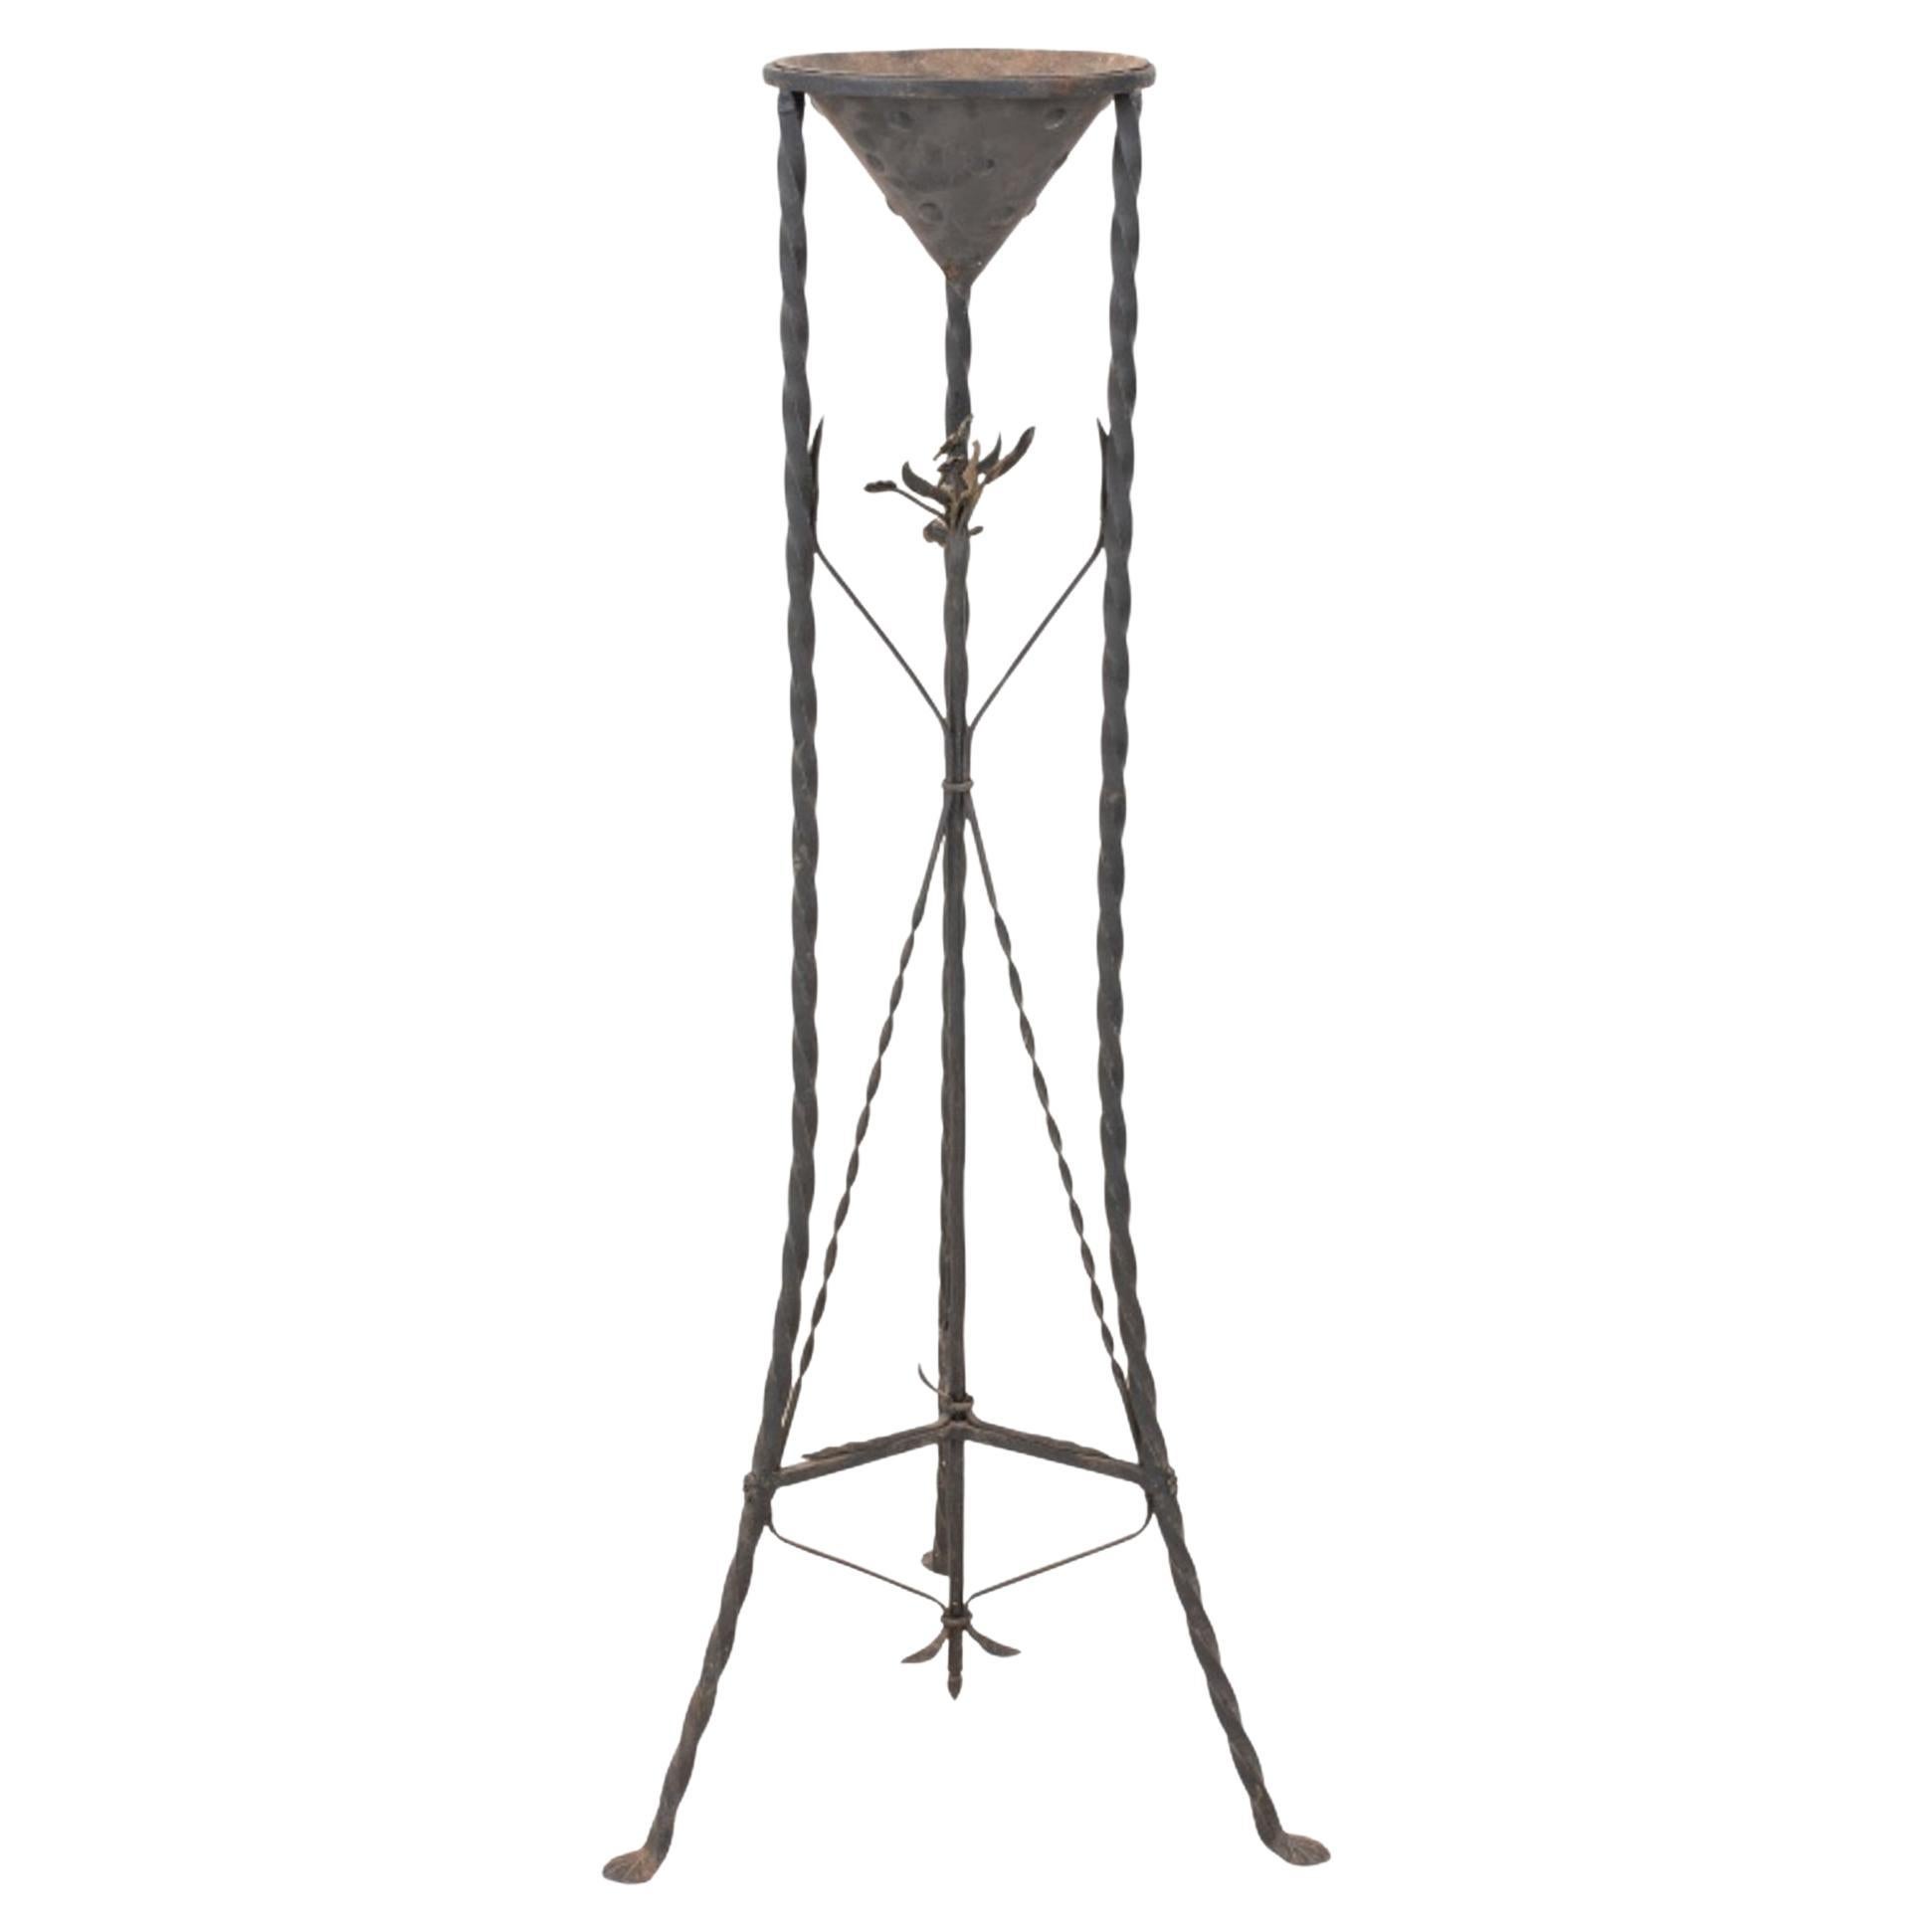 Spanish Style Wrought Iron Plant Stand